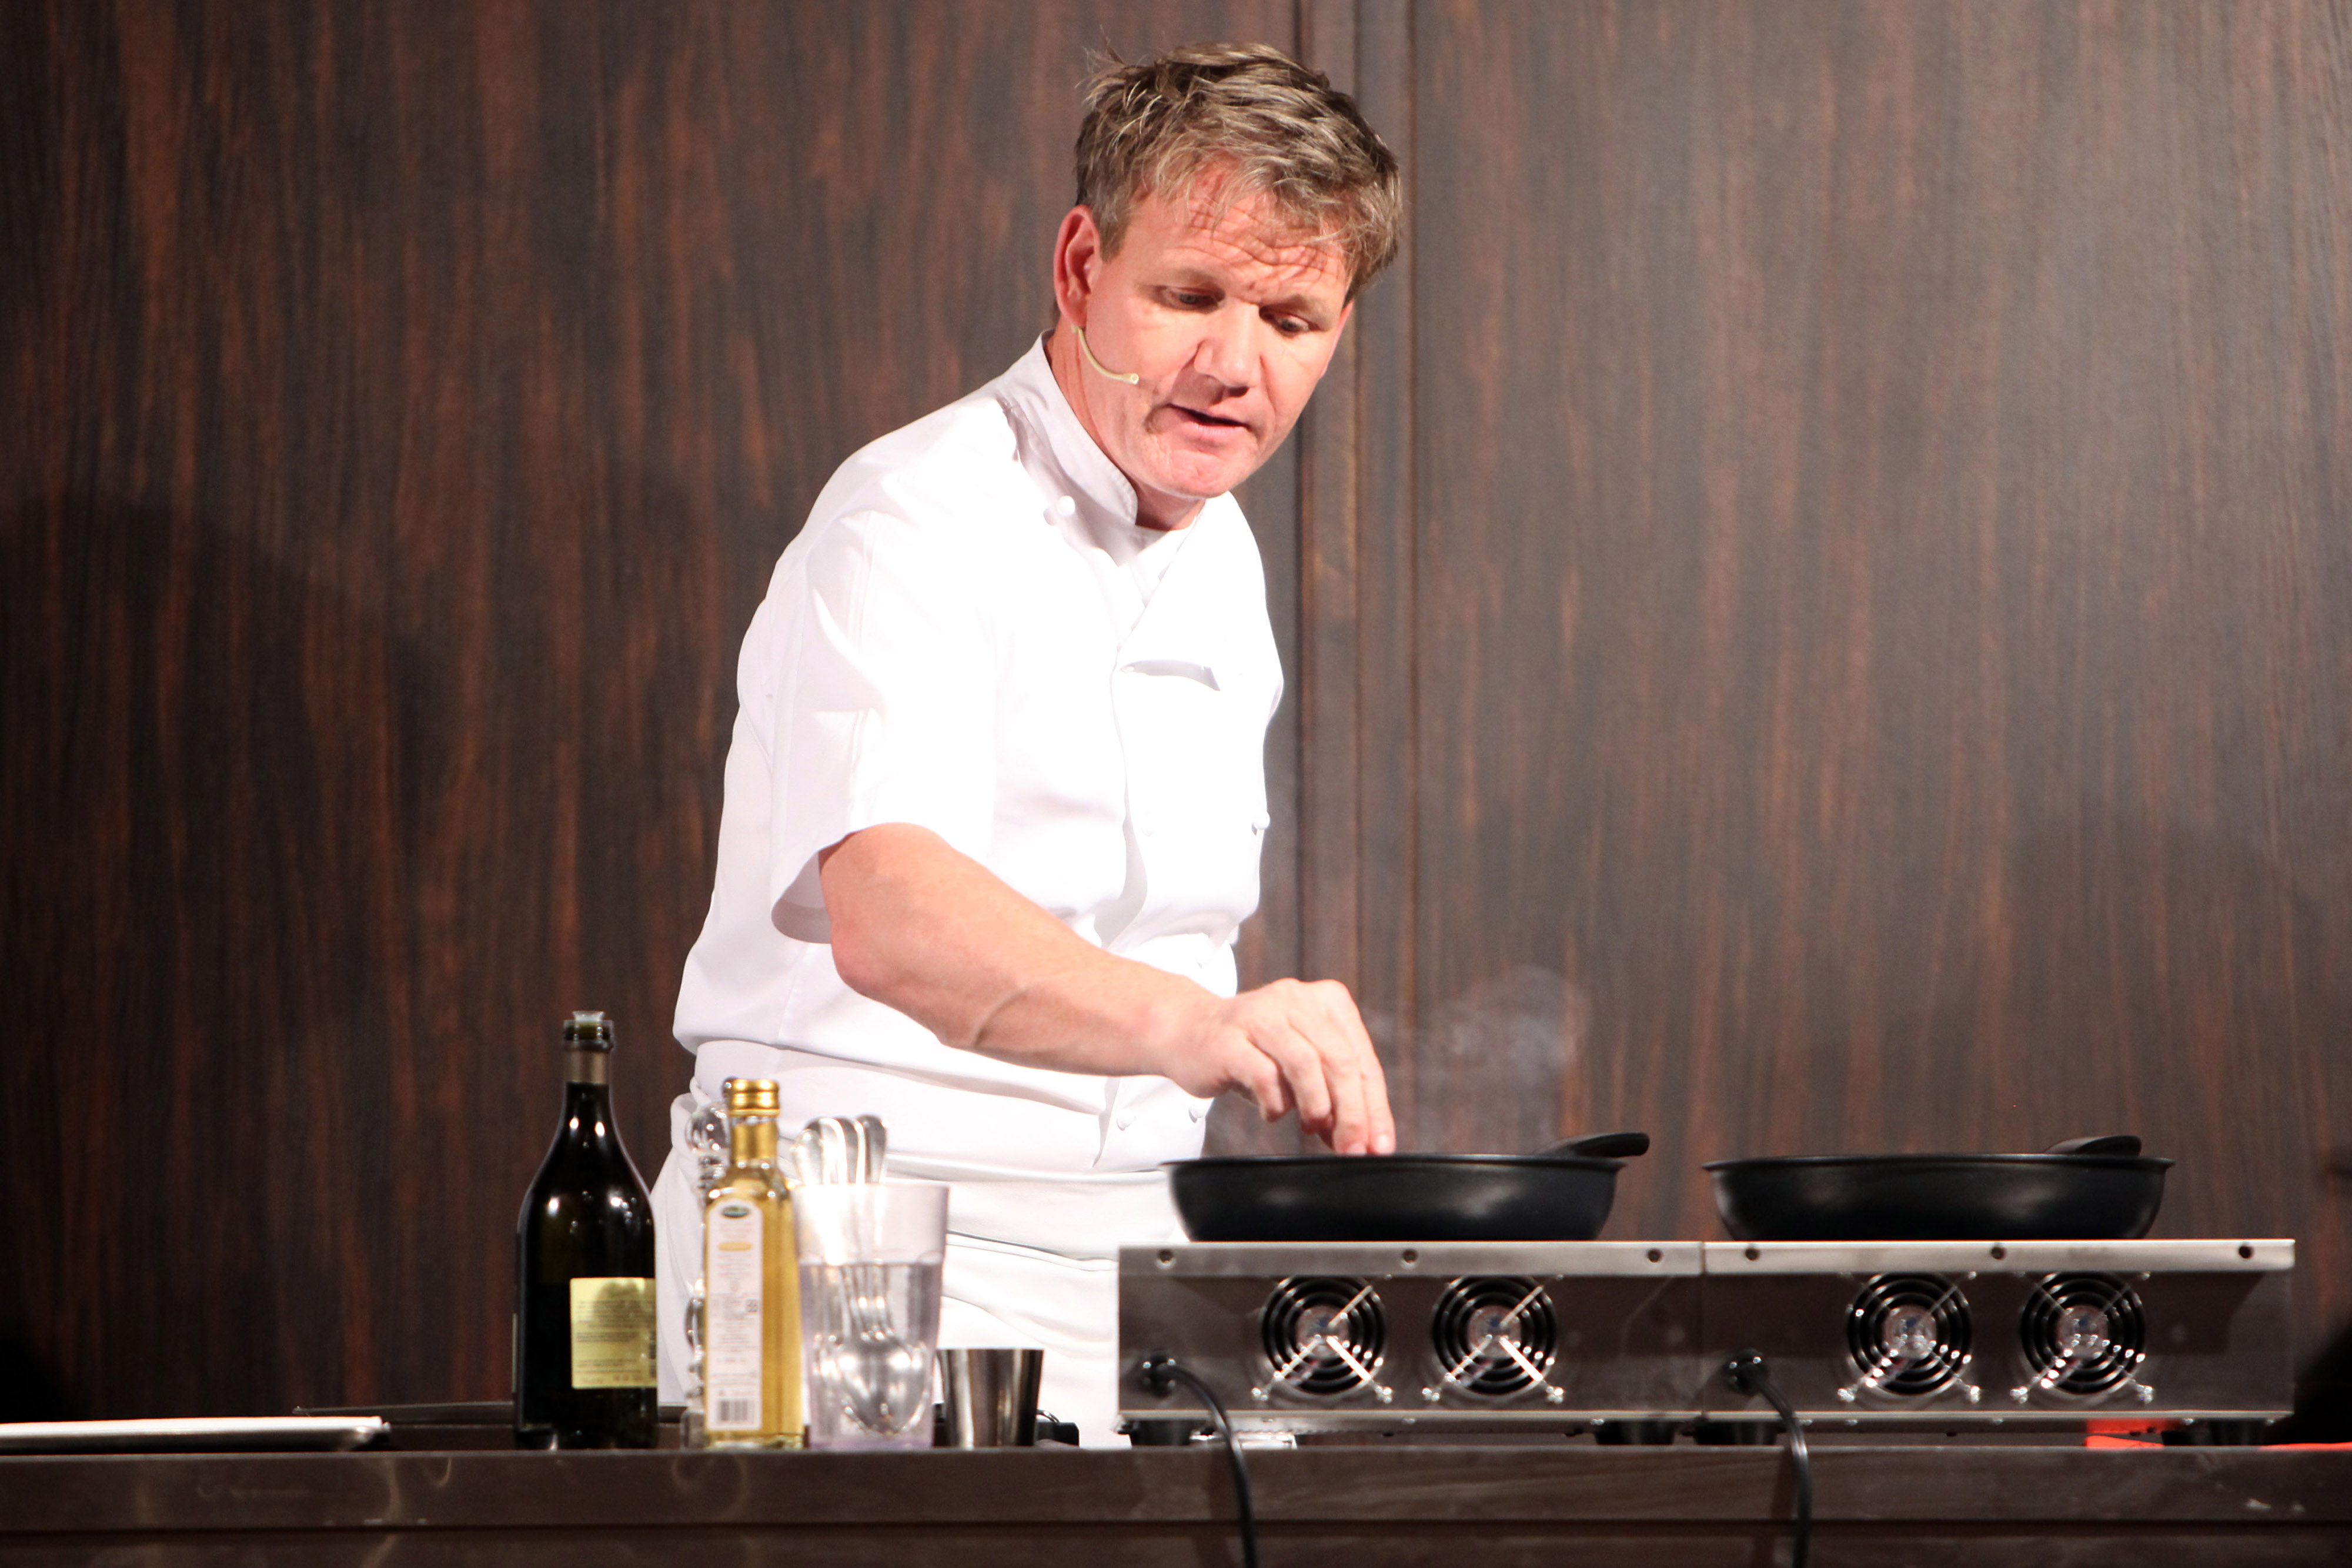 Gordon Ramsay holds a cooking class at the Castel Monastero Resort on July 5, 2012